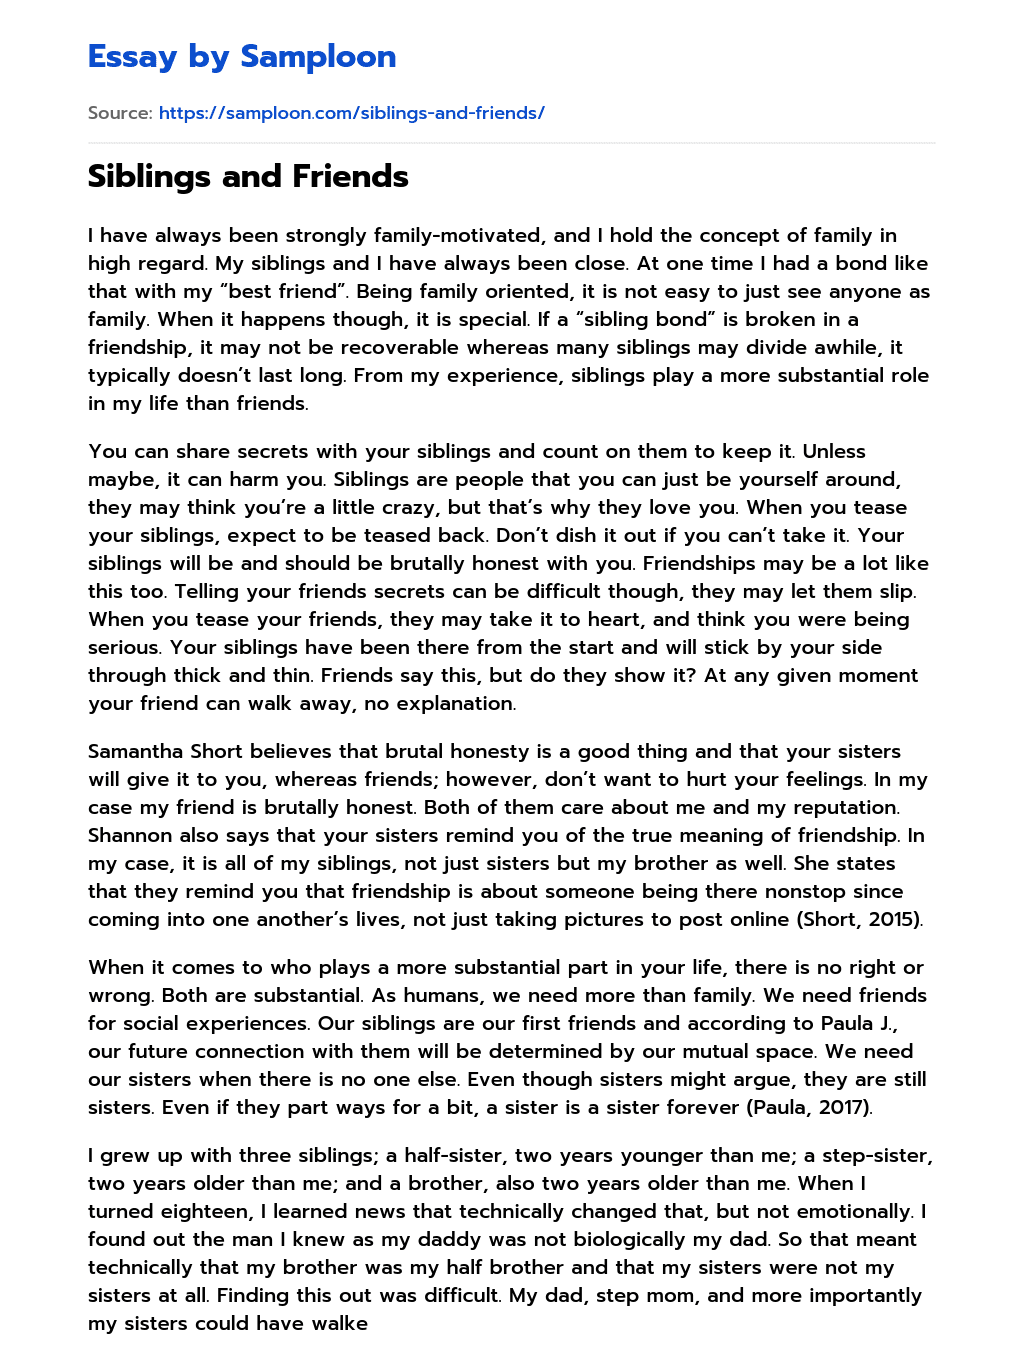 essay about relationship with siblings